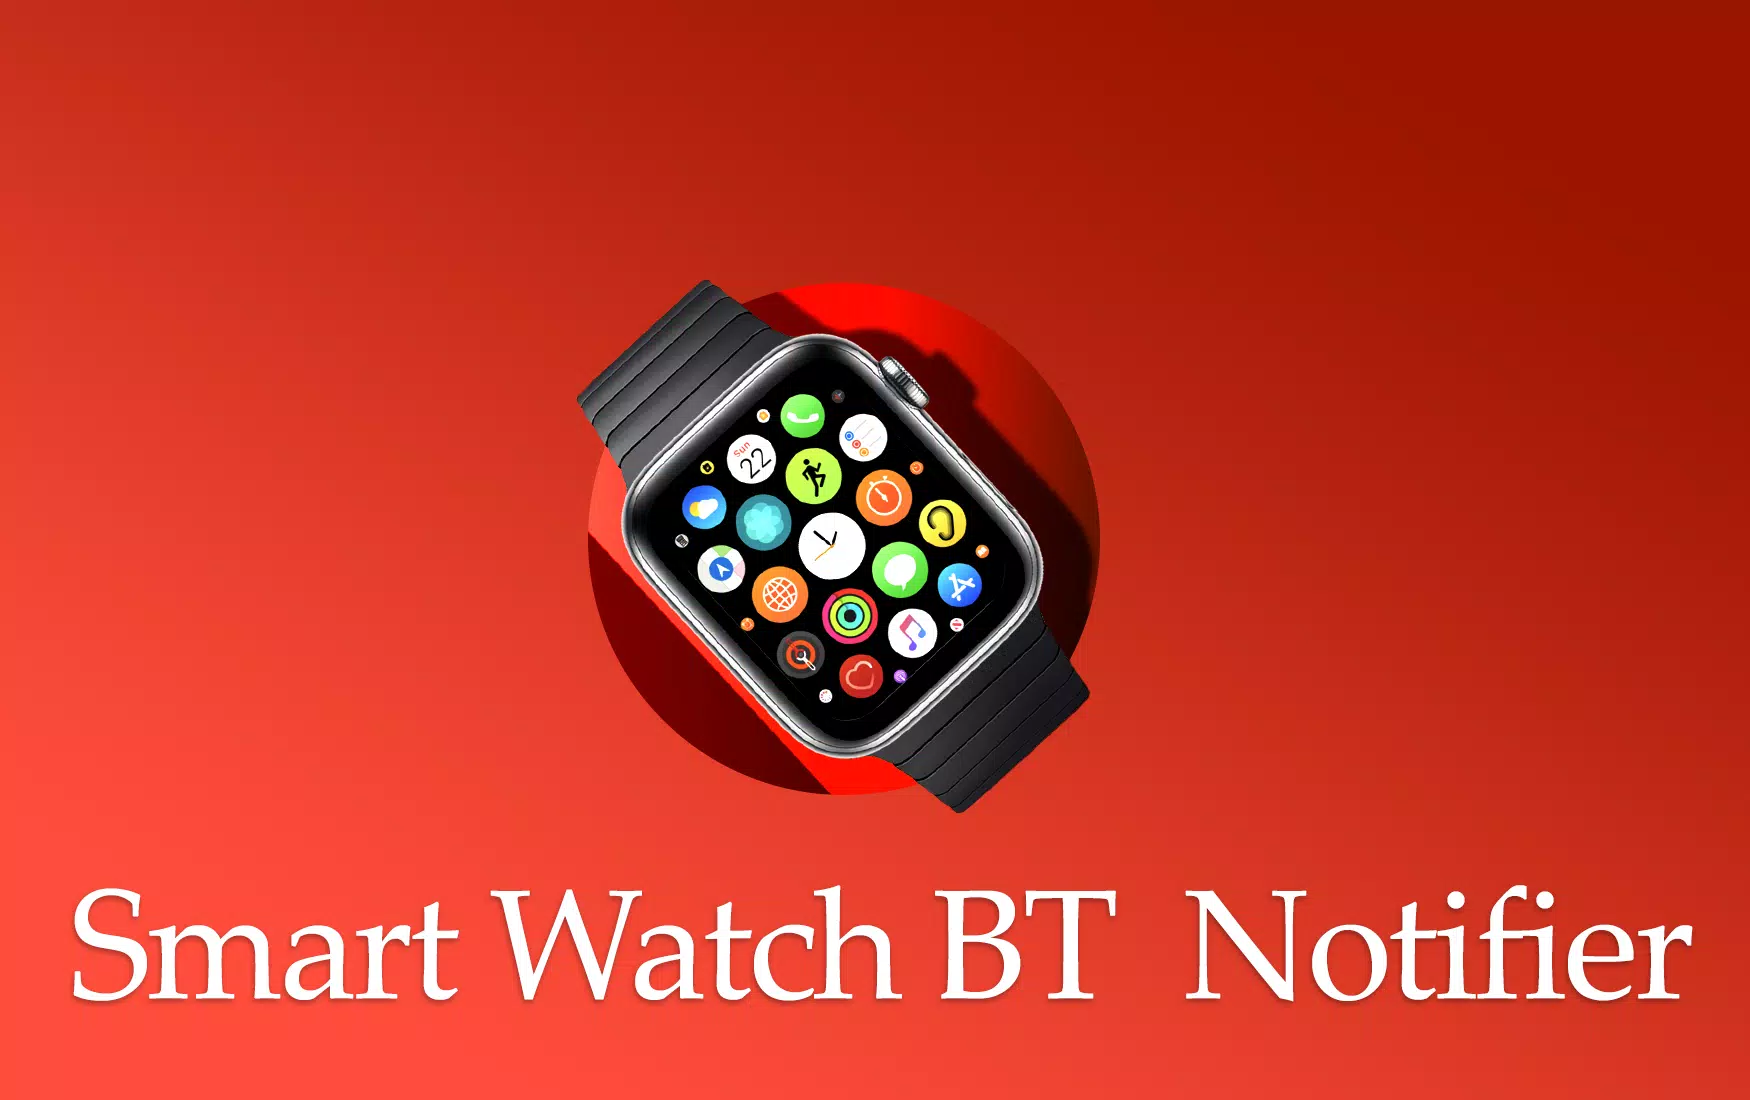 paraply taske Borgmester SmartWatch control - BT Notifier APK for Android Download